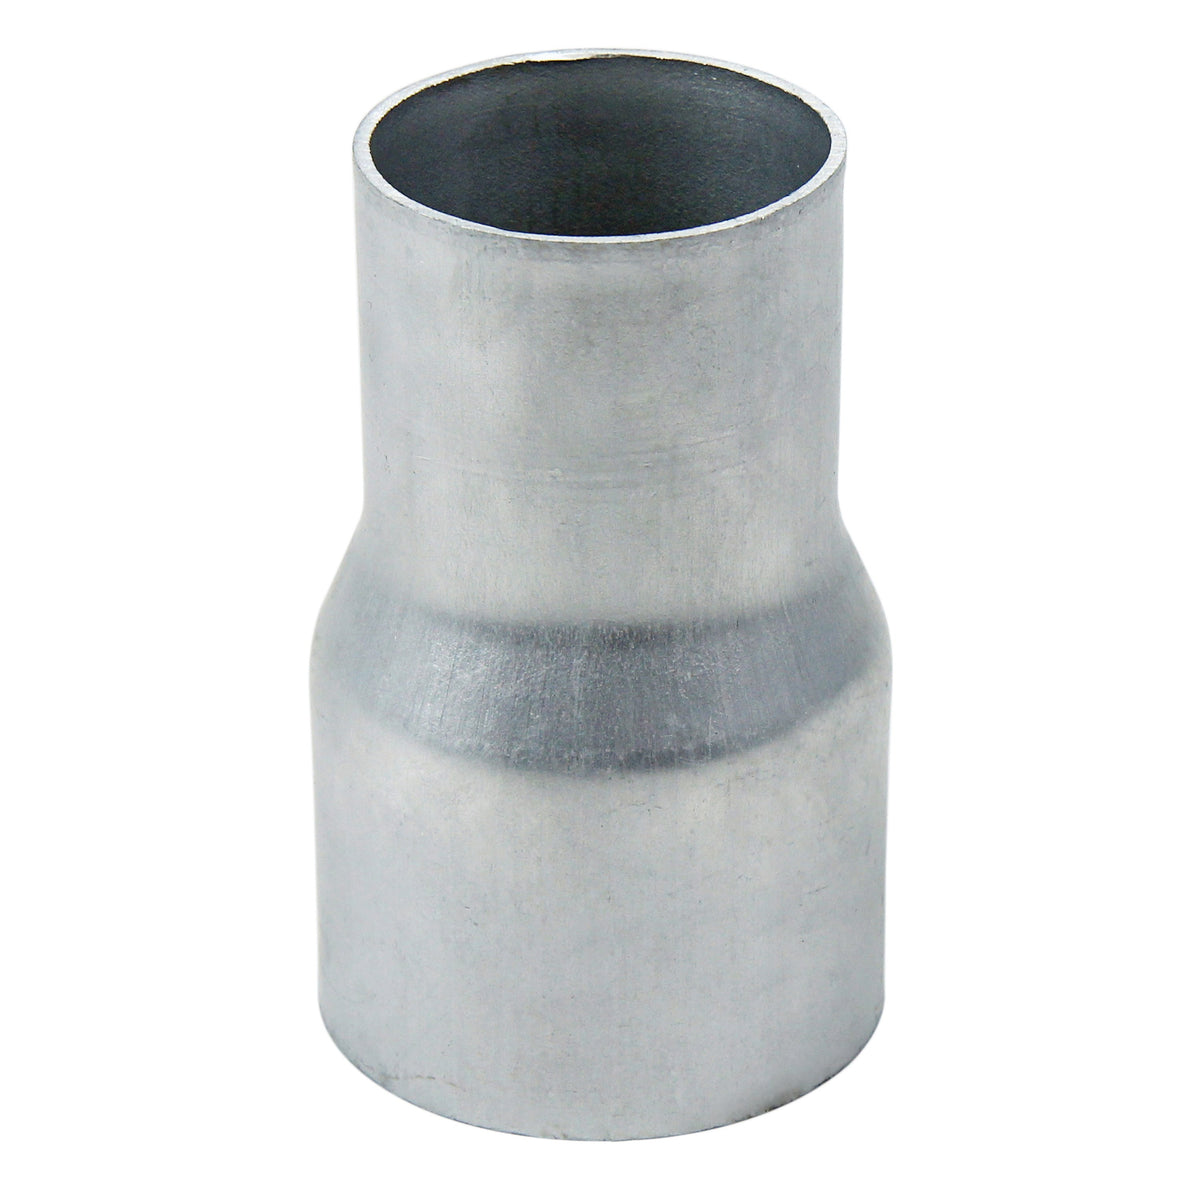 HPS 1.5 inch OD to 1.5 inch ID, 6061 Aluminum Slip Fit Transition Reducer Tube Joiner, 4 inch Long